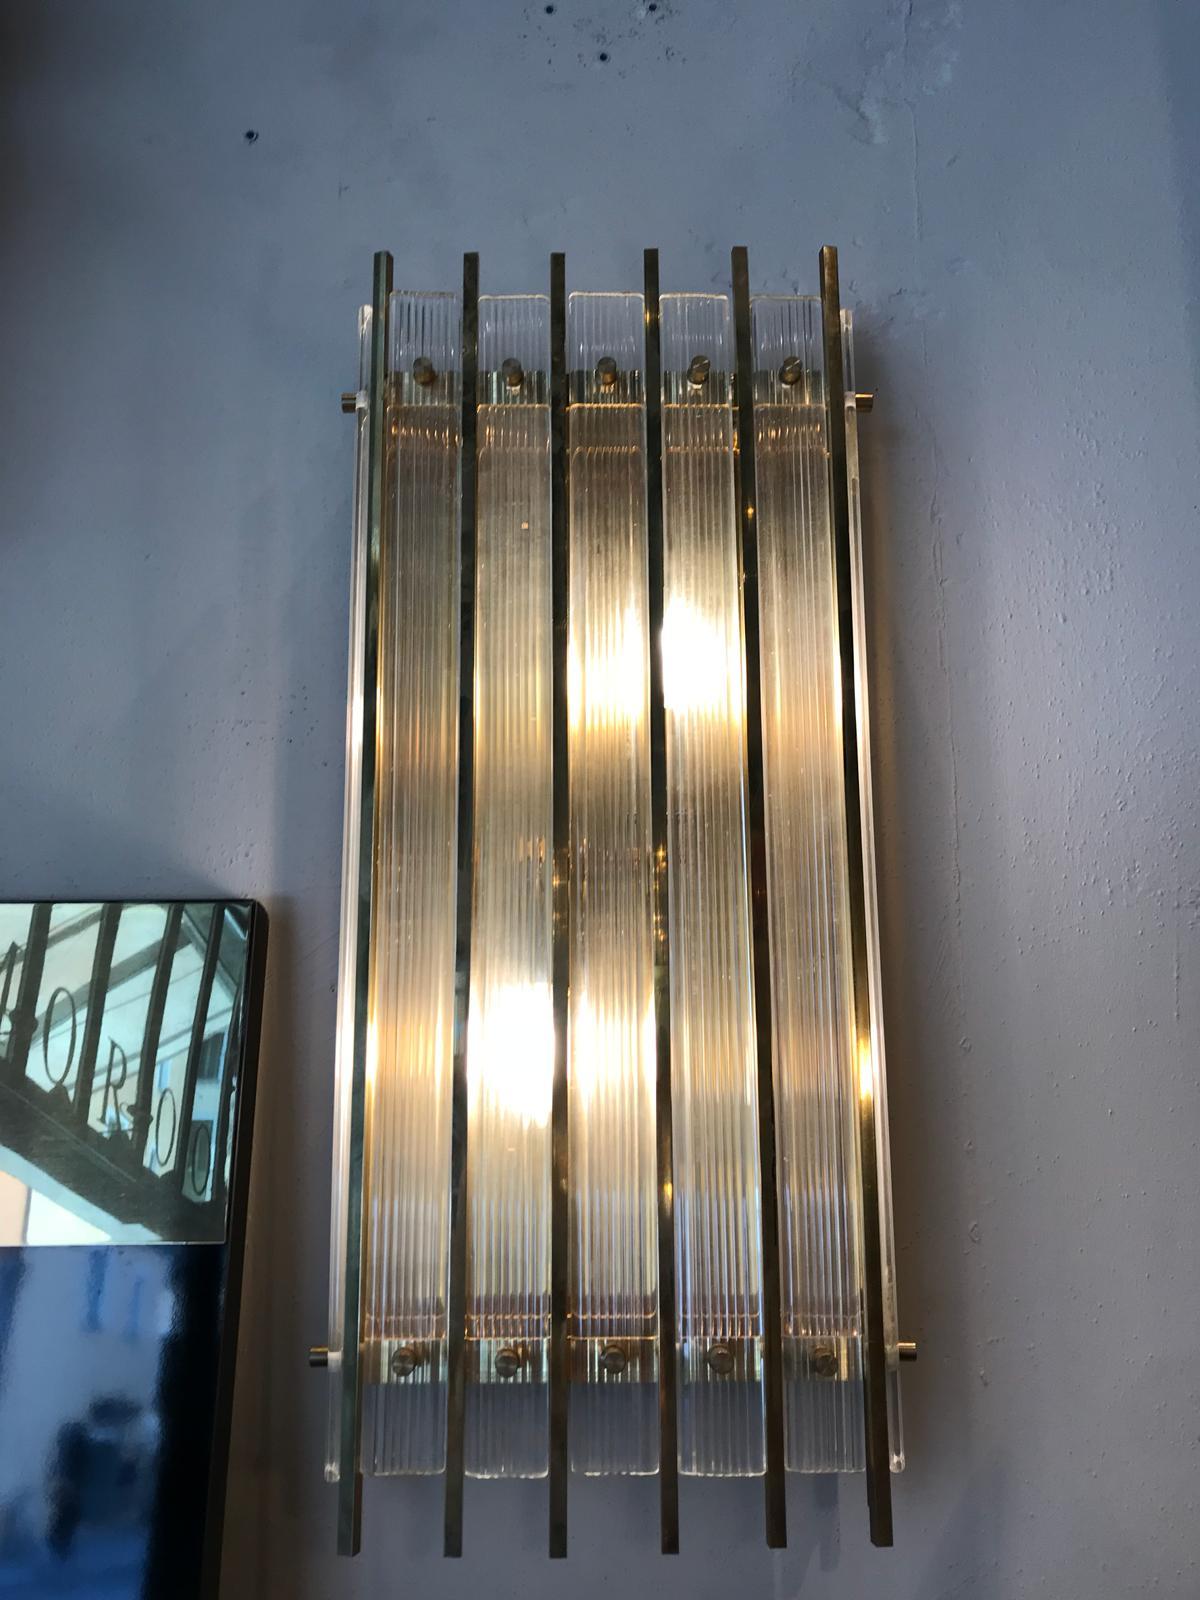 Applique, wall light, made by the famous Murano furnace Venini.
Made in Italy in the 1980s
Murano glass and nickel bars.
 